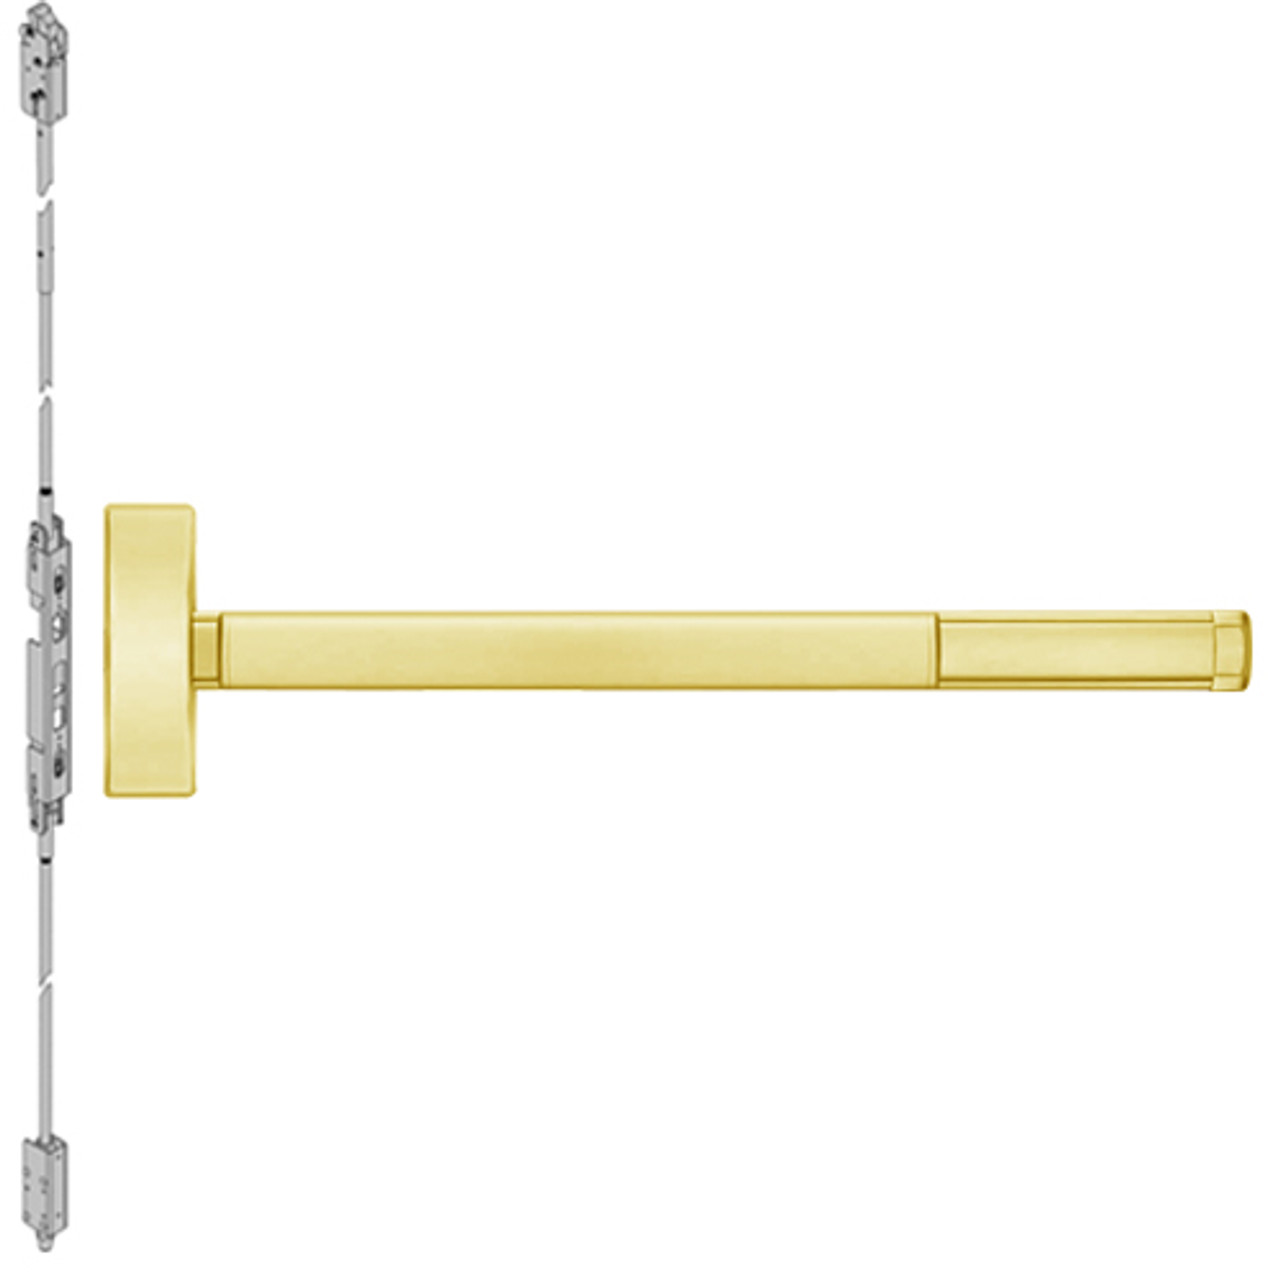 TS2808-605-36 PHI 2800 Series Concealed Vertical Rod Exit Device with Touchbar Monitoring Switch Prepped for Key Controls Lever-Knob in Bright Brass Finish